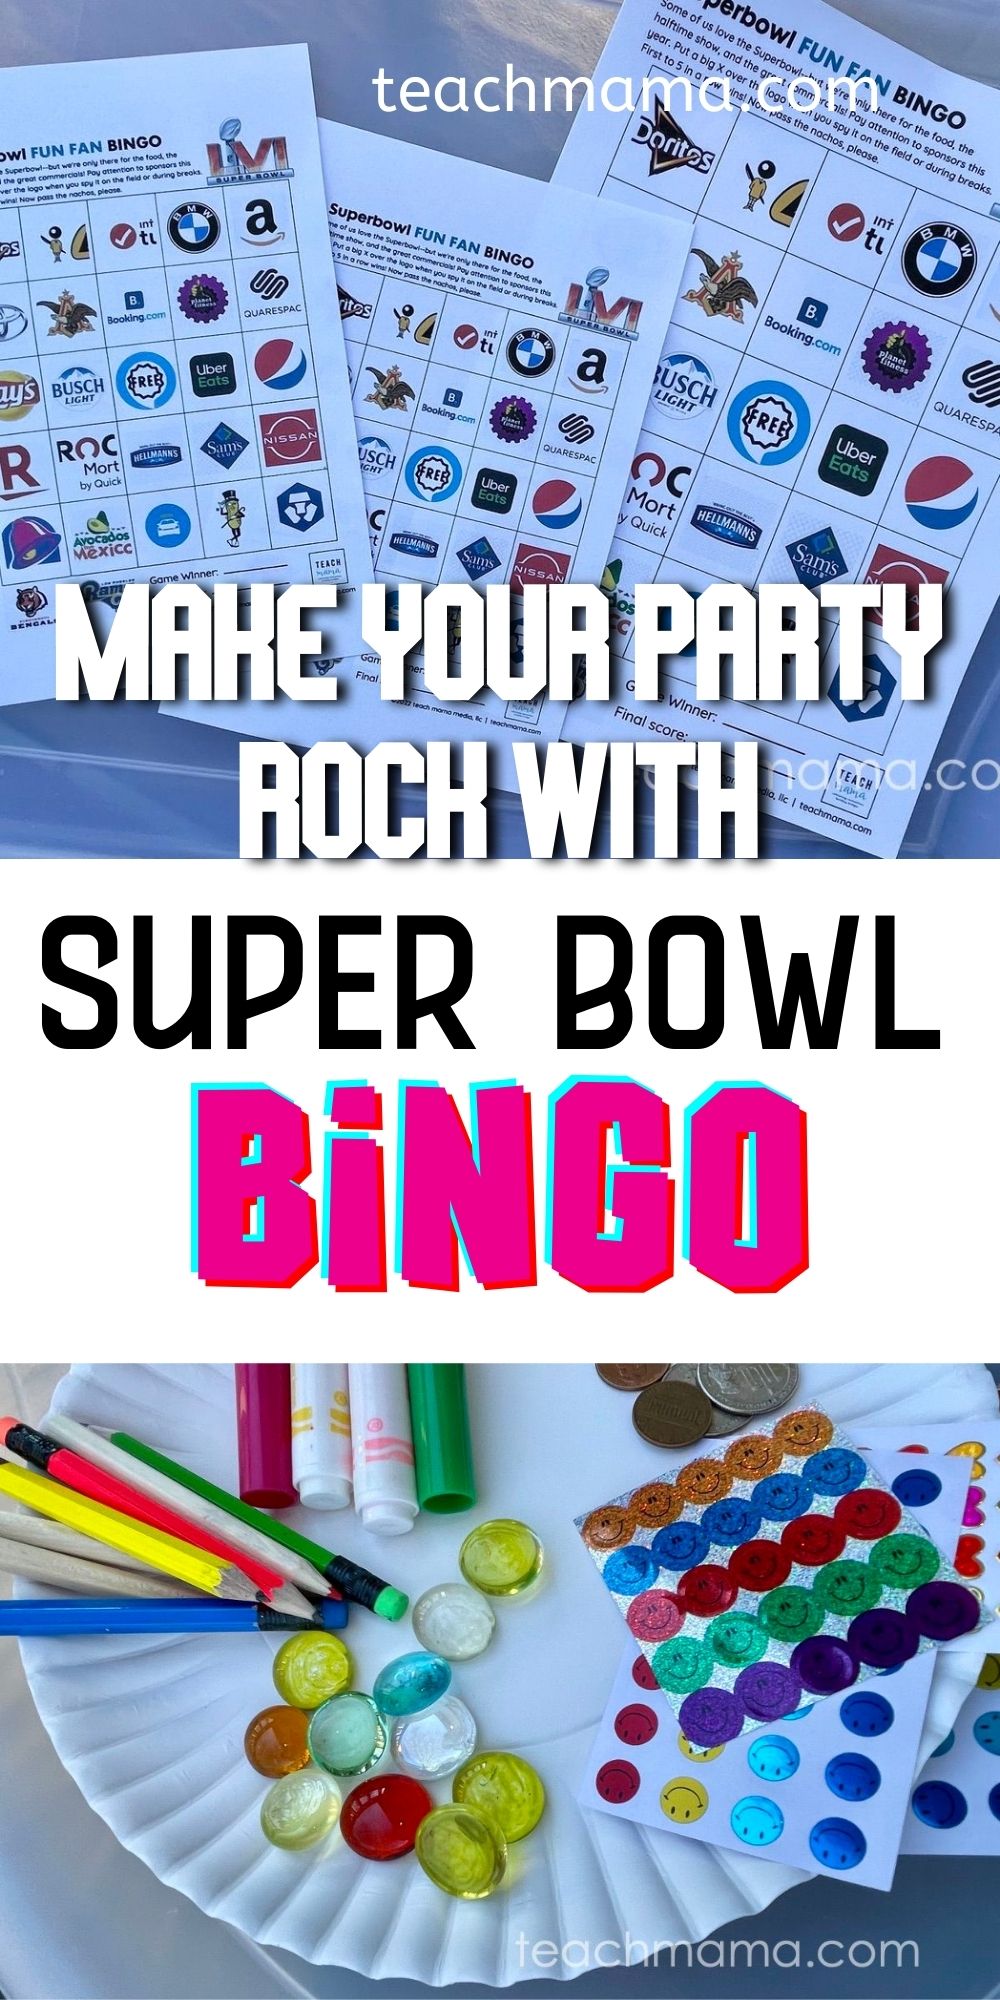 FREE super bowl bingo and party games for all fans